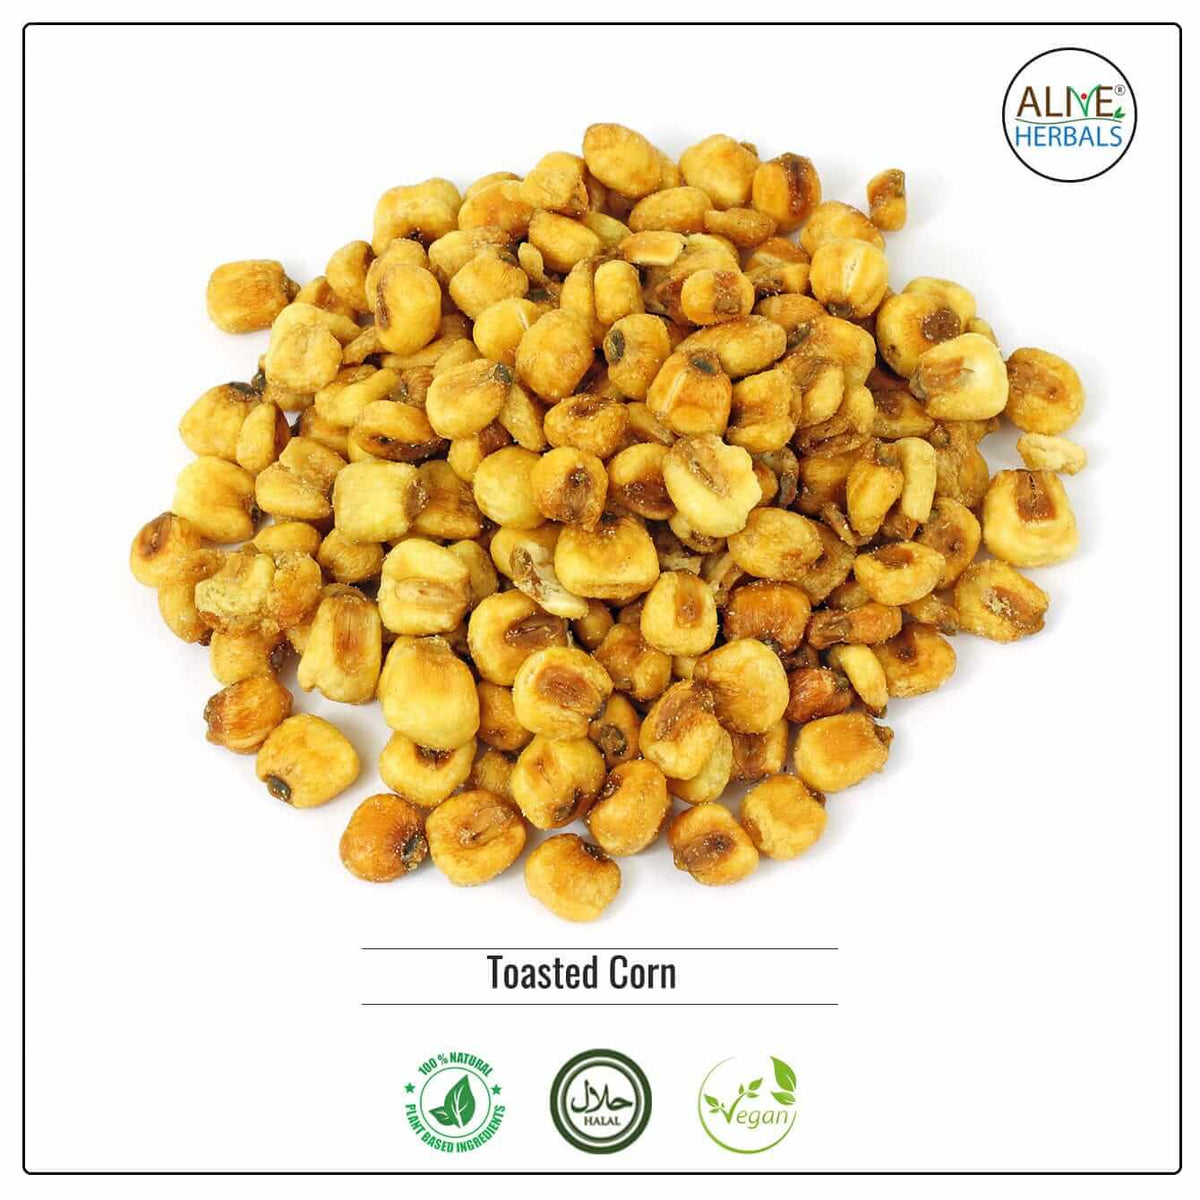 Toasted Corn Nuts - Buy at Natural Food Store | Alive Herbals.